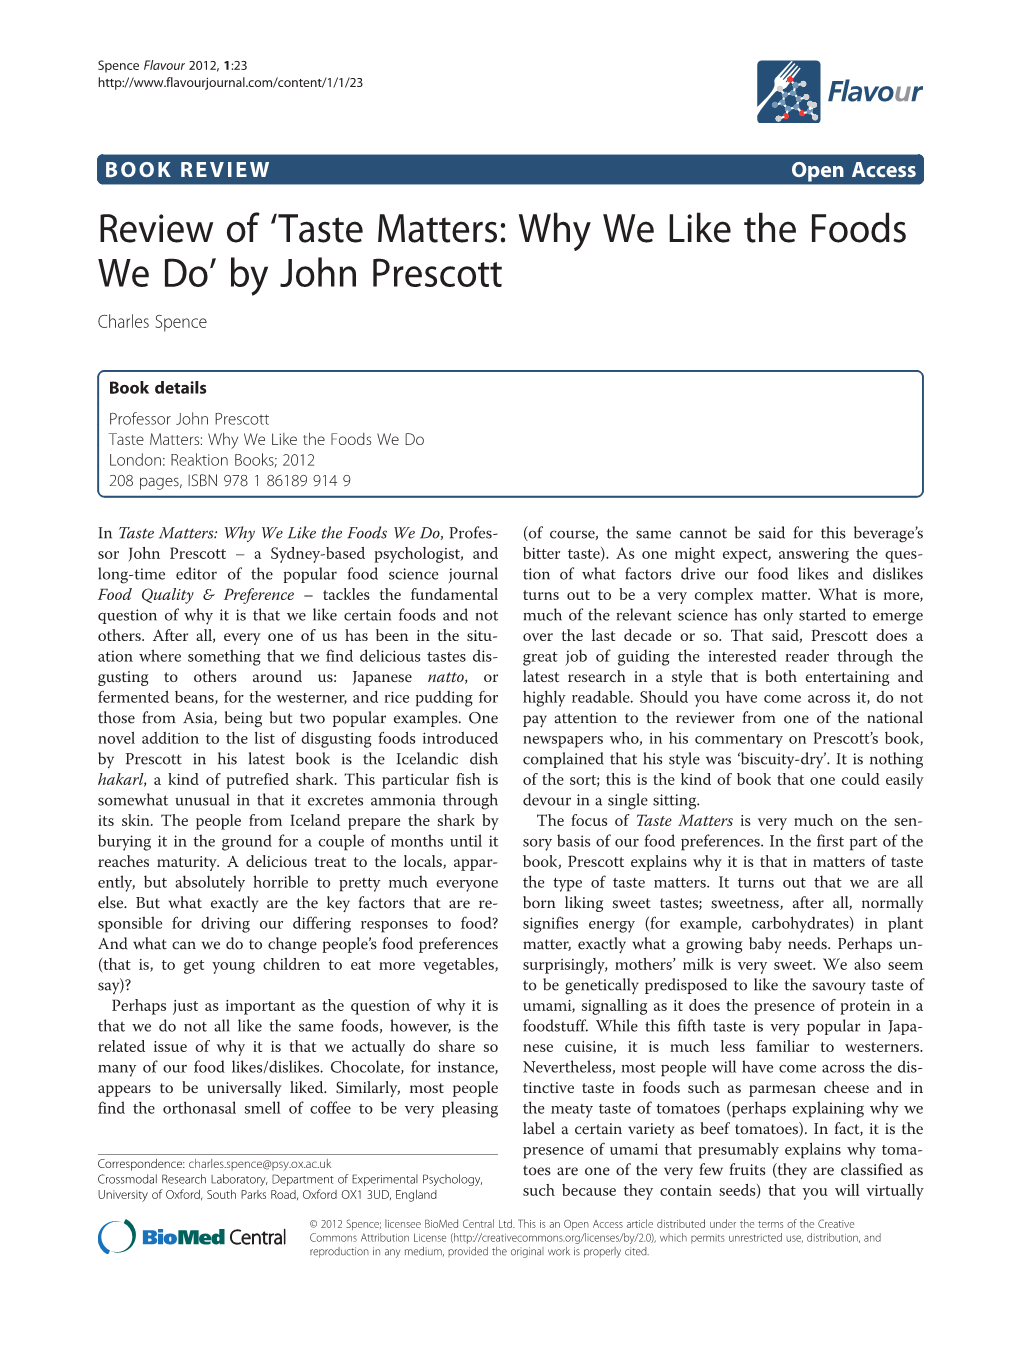 Review of 'Taste Matters: Why We Like the Foods We Do' by John Prescott